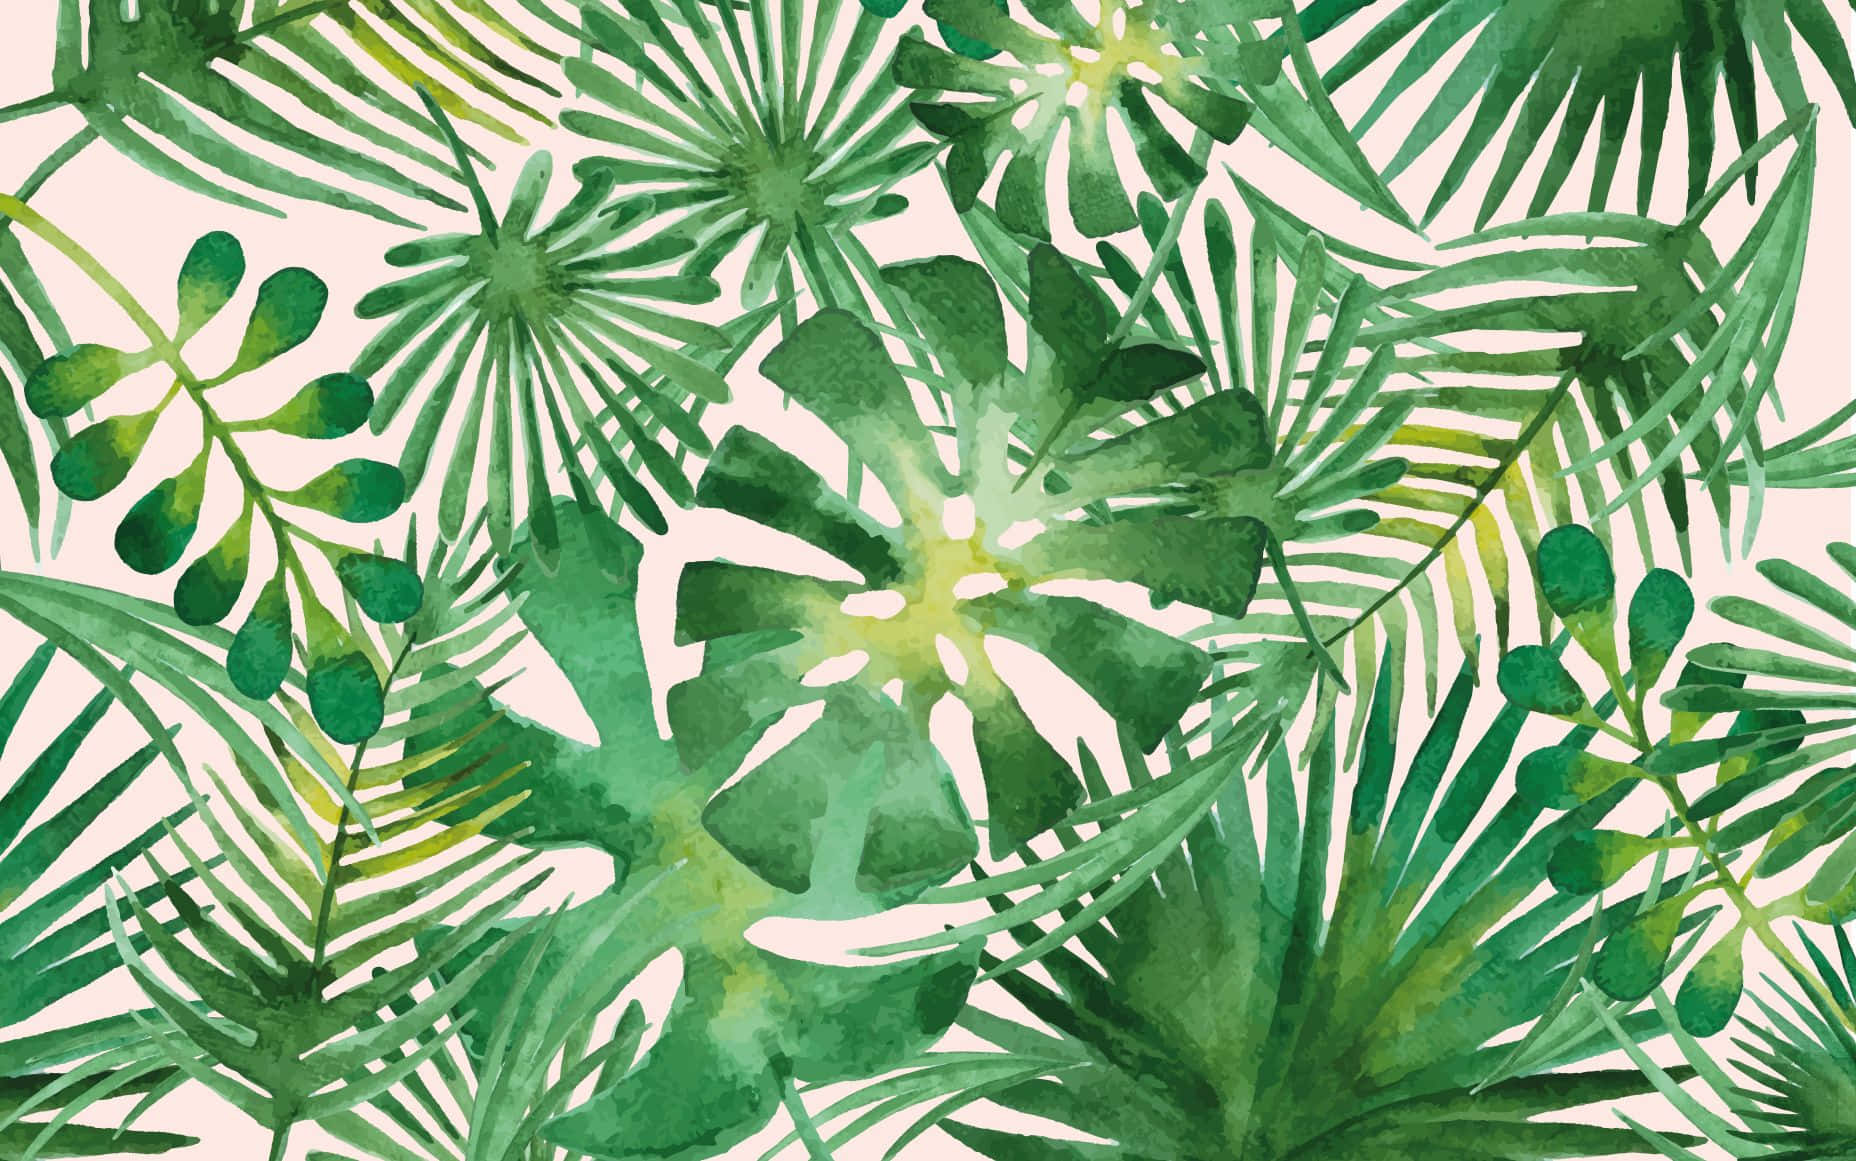 Tropical leaves create a vibrant natural background.